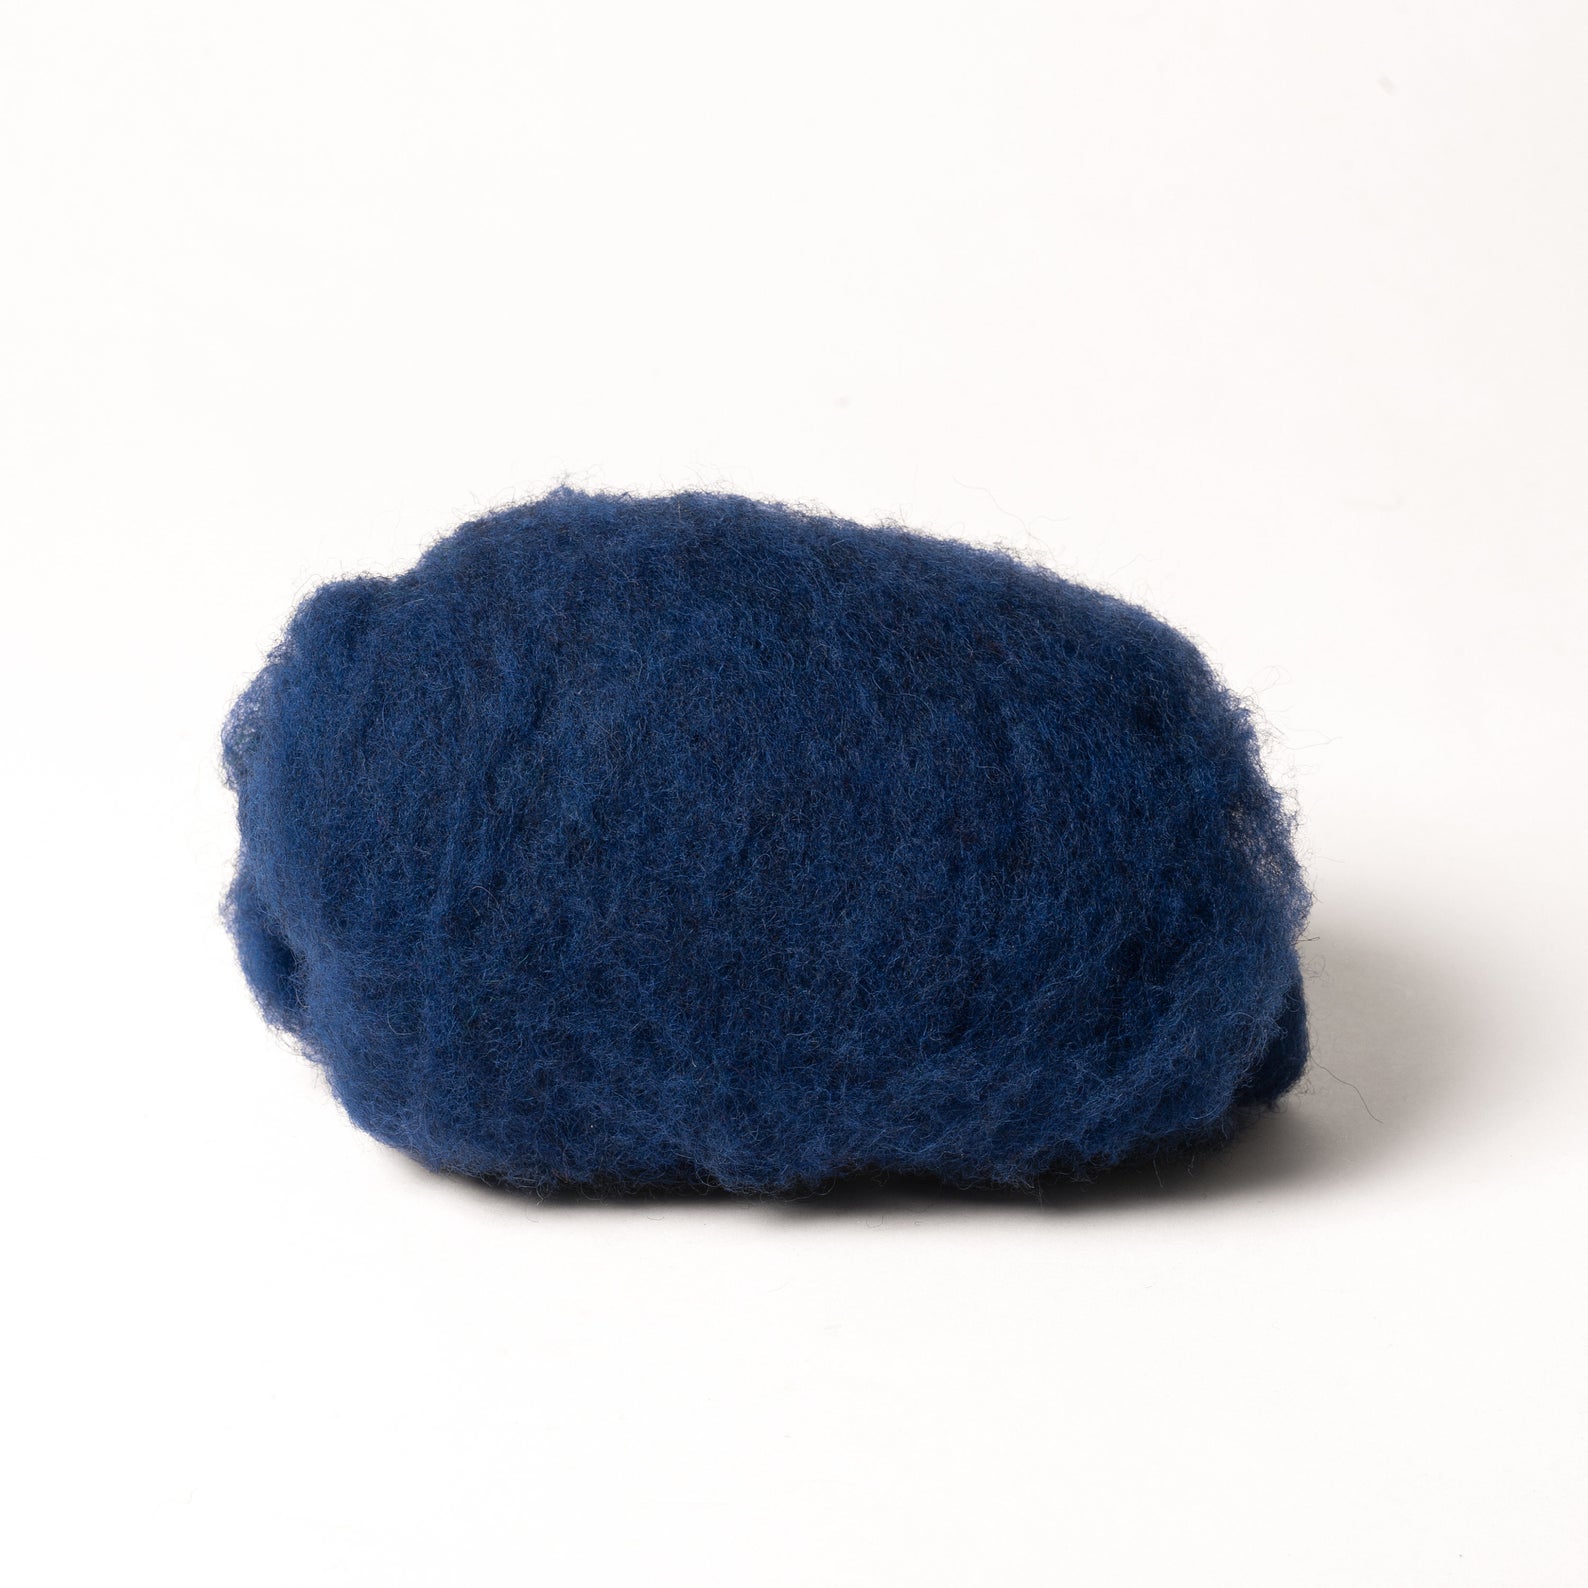 Carded and Colored Dark Blue Wool for Wet Felting for Sale